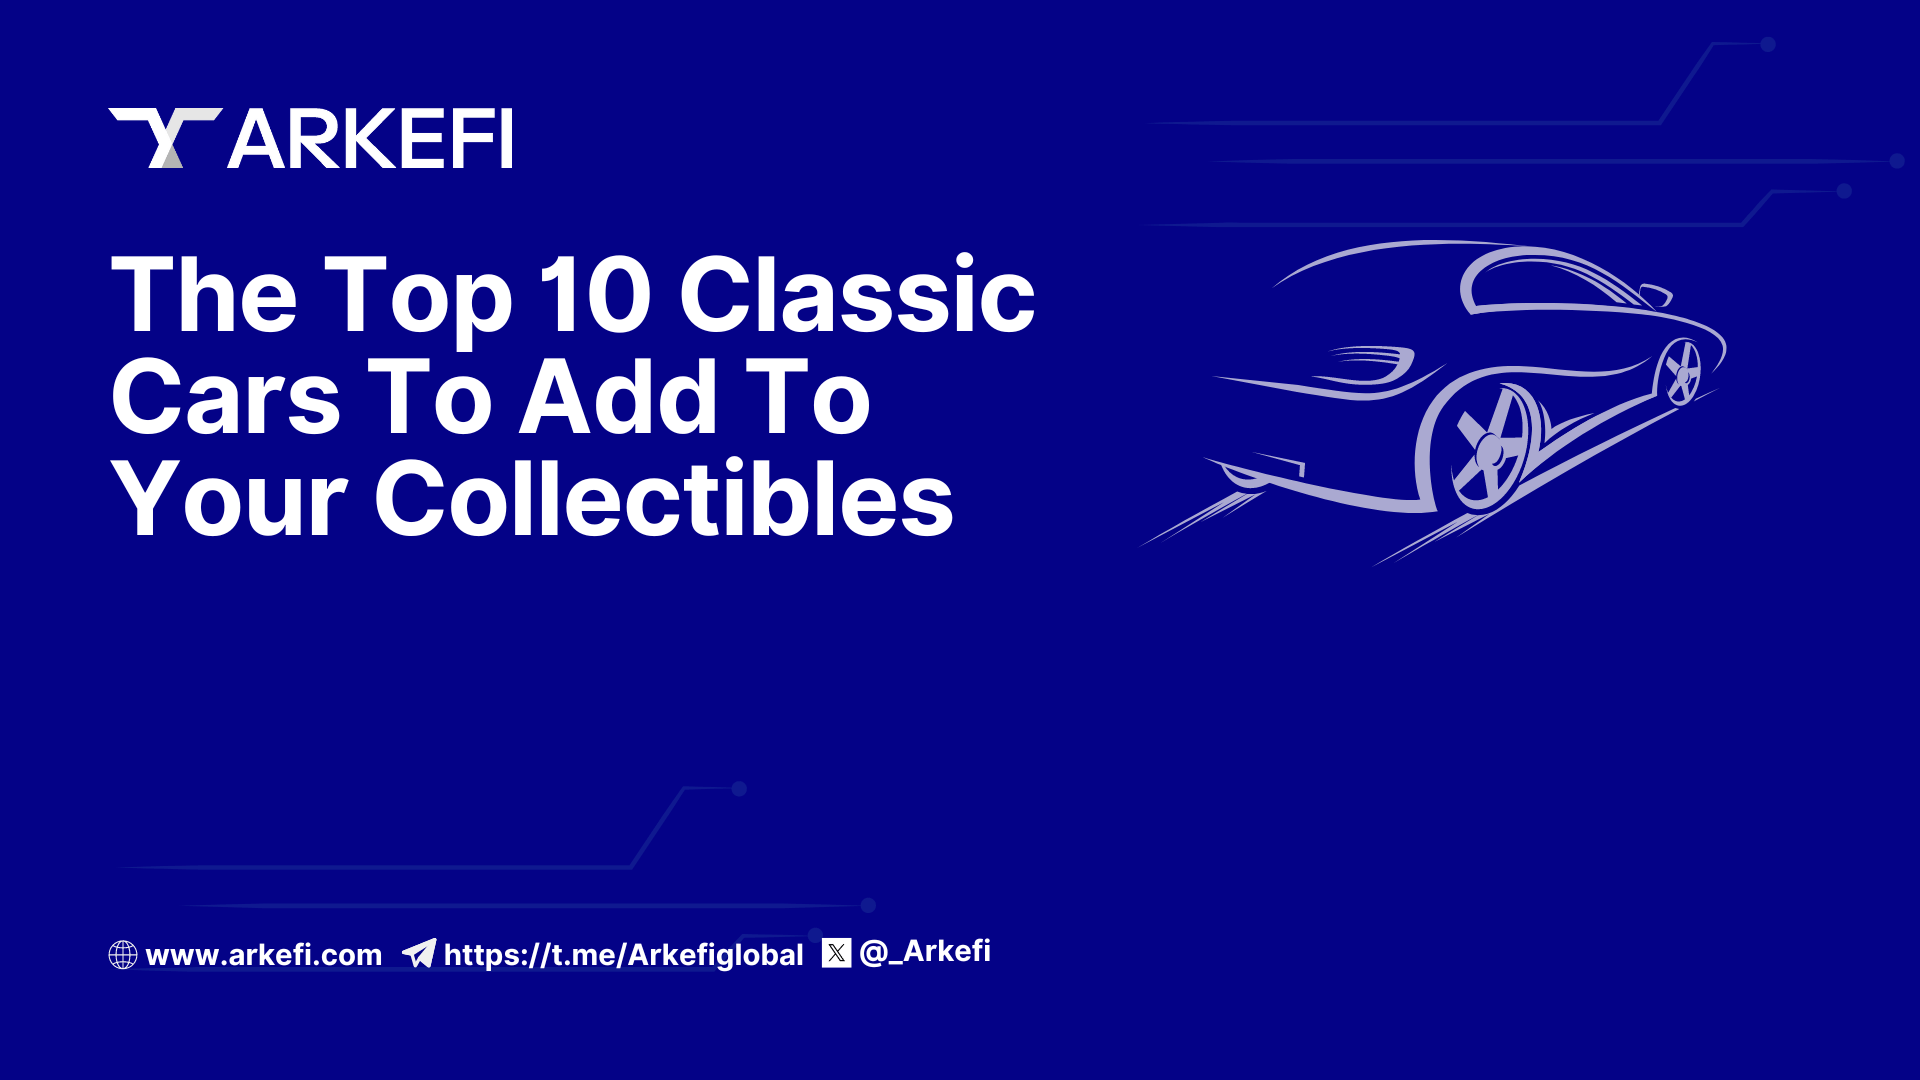 The Top 10 Classic Cars To Add To Your Collectibles